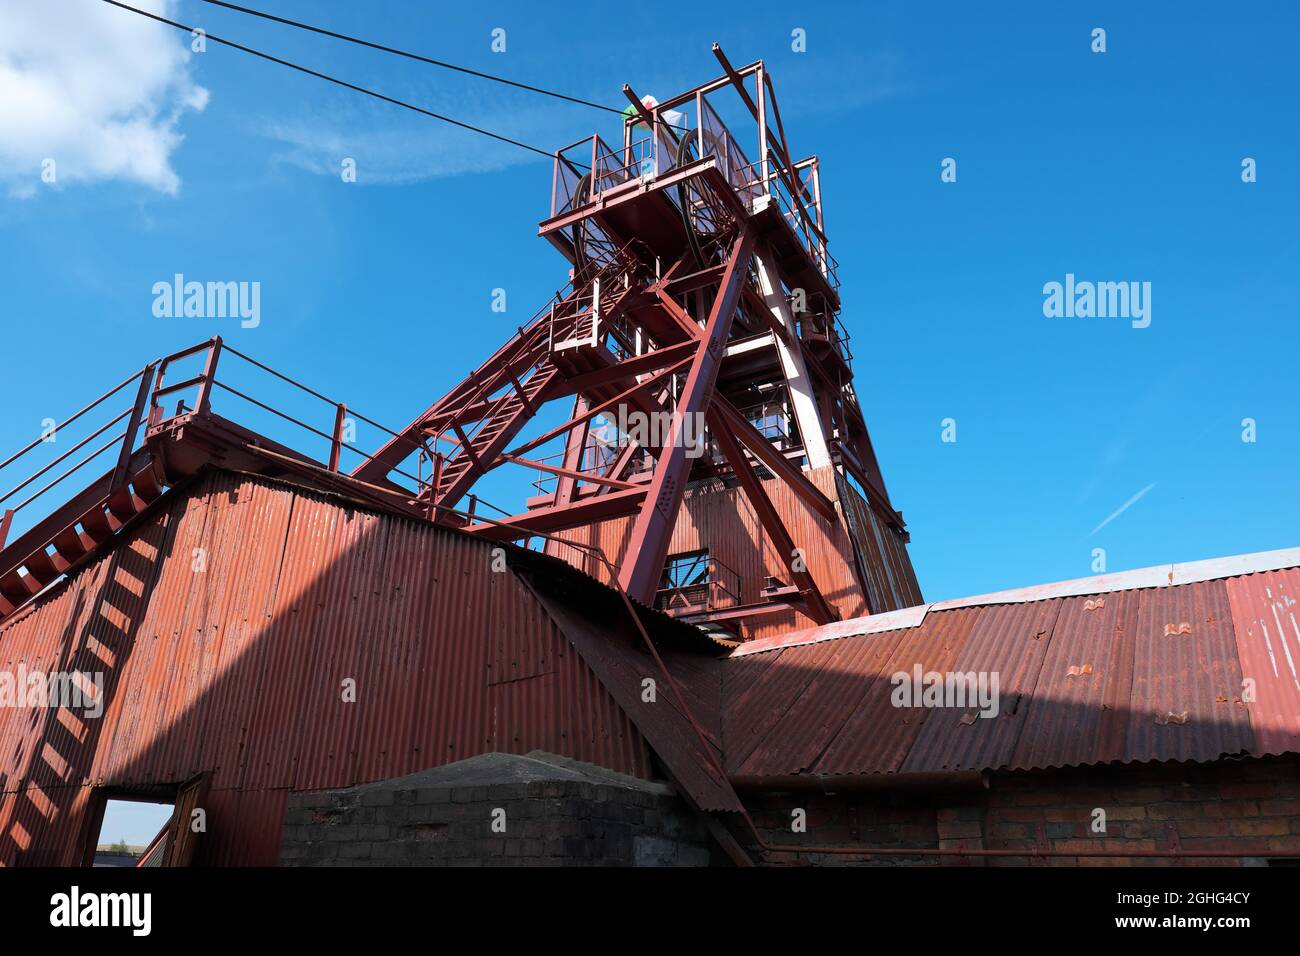 Big Pit National Coal Museum preserved coal mine and World Heritage Site at Blaenavon Wales UK in September 2021 Stock Photo